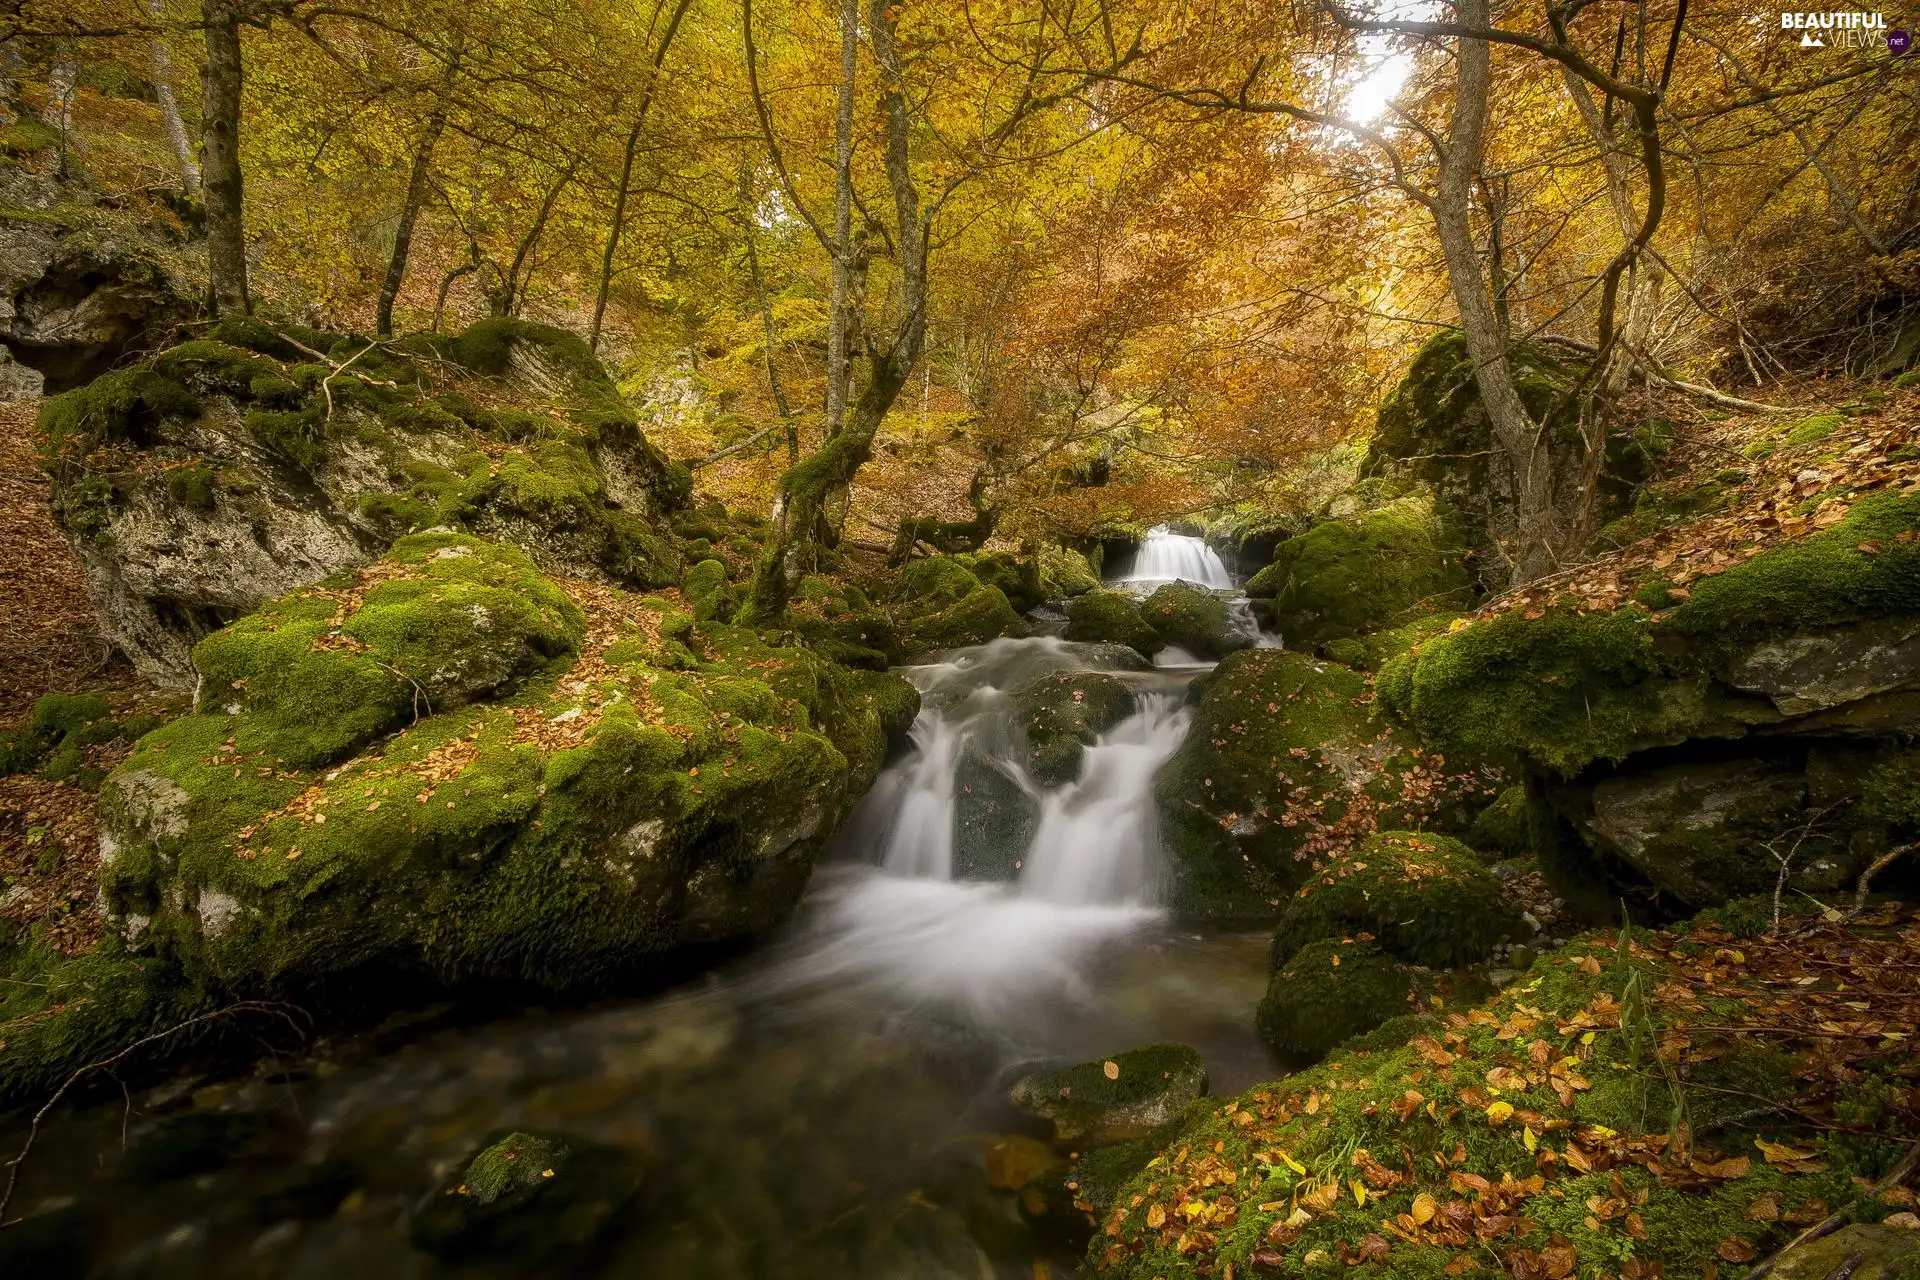 River, forest, mossy, rocks, Leaf, autumn, trees, viewes, Stones